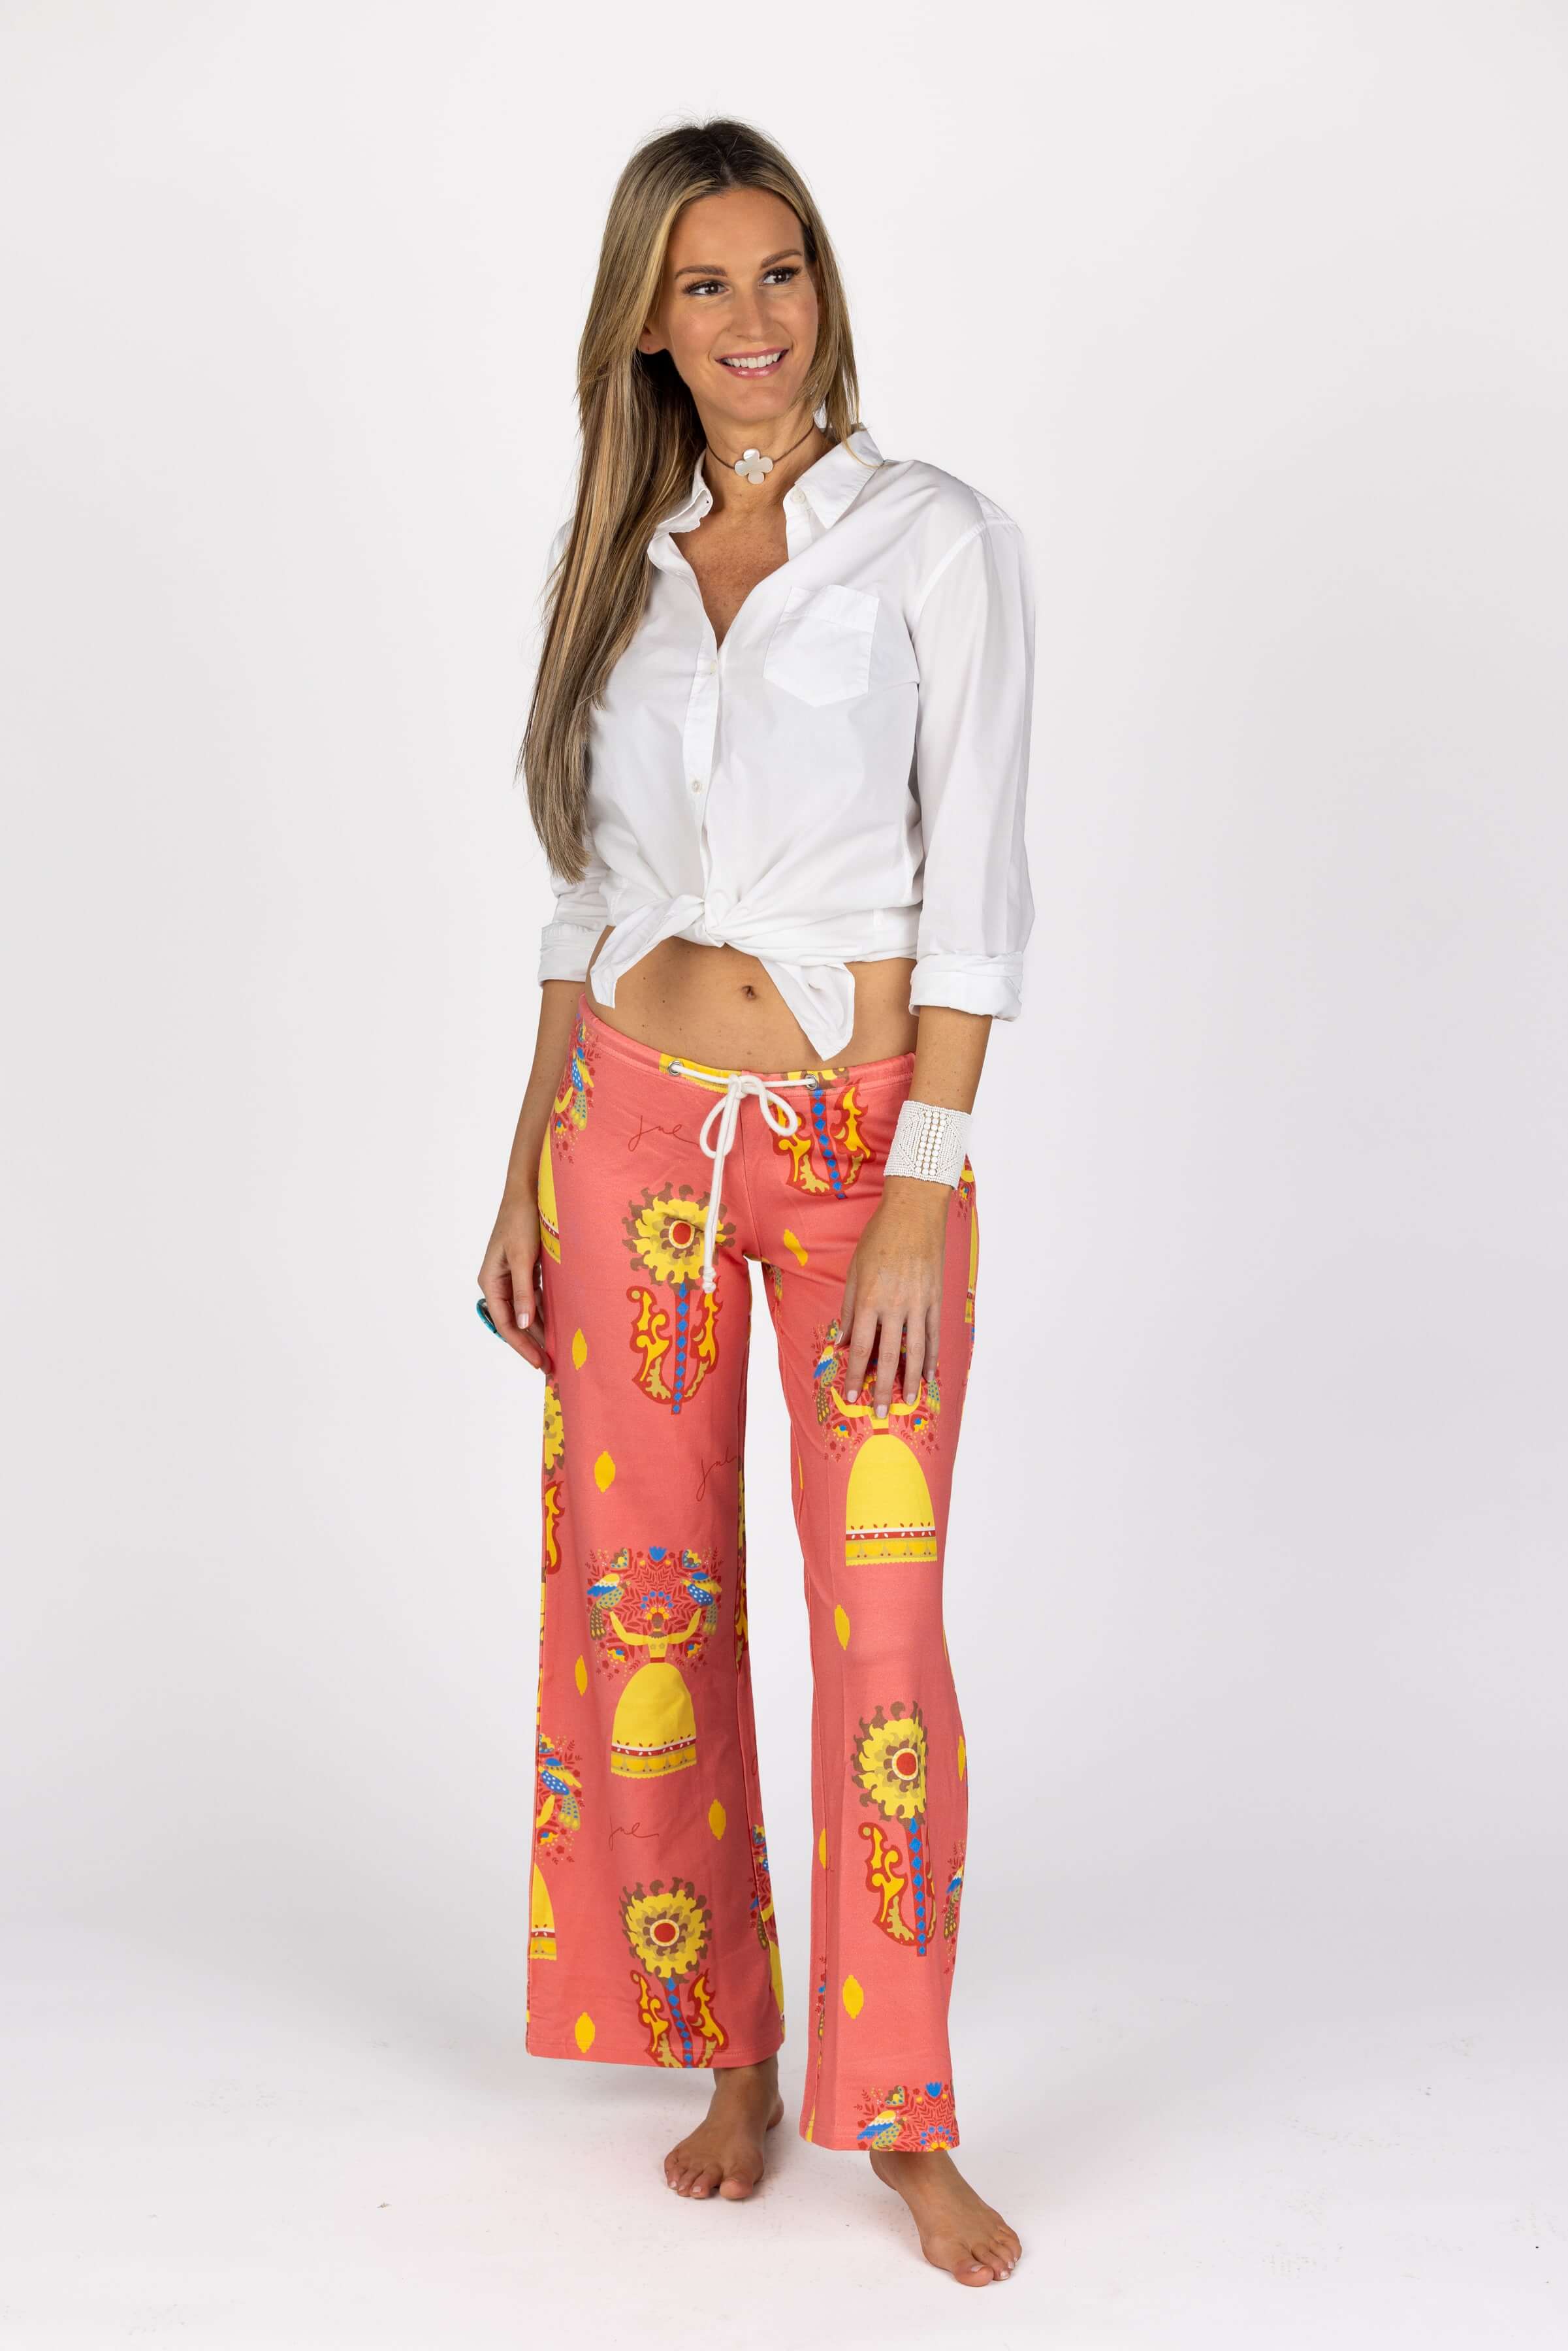 The terrycloth Sea Voyage pants in Spanish Lovers Pink